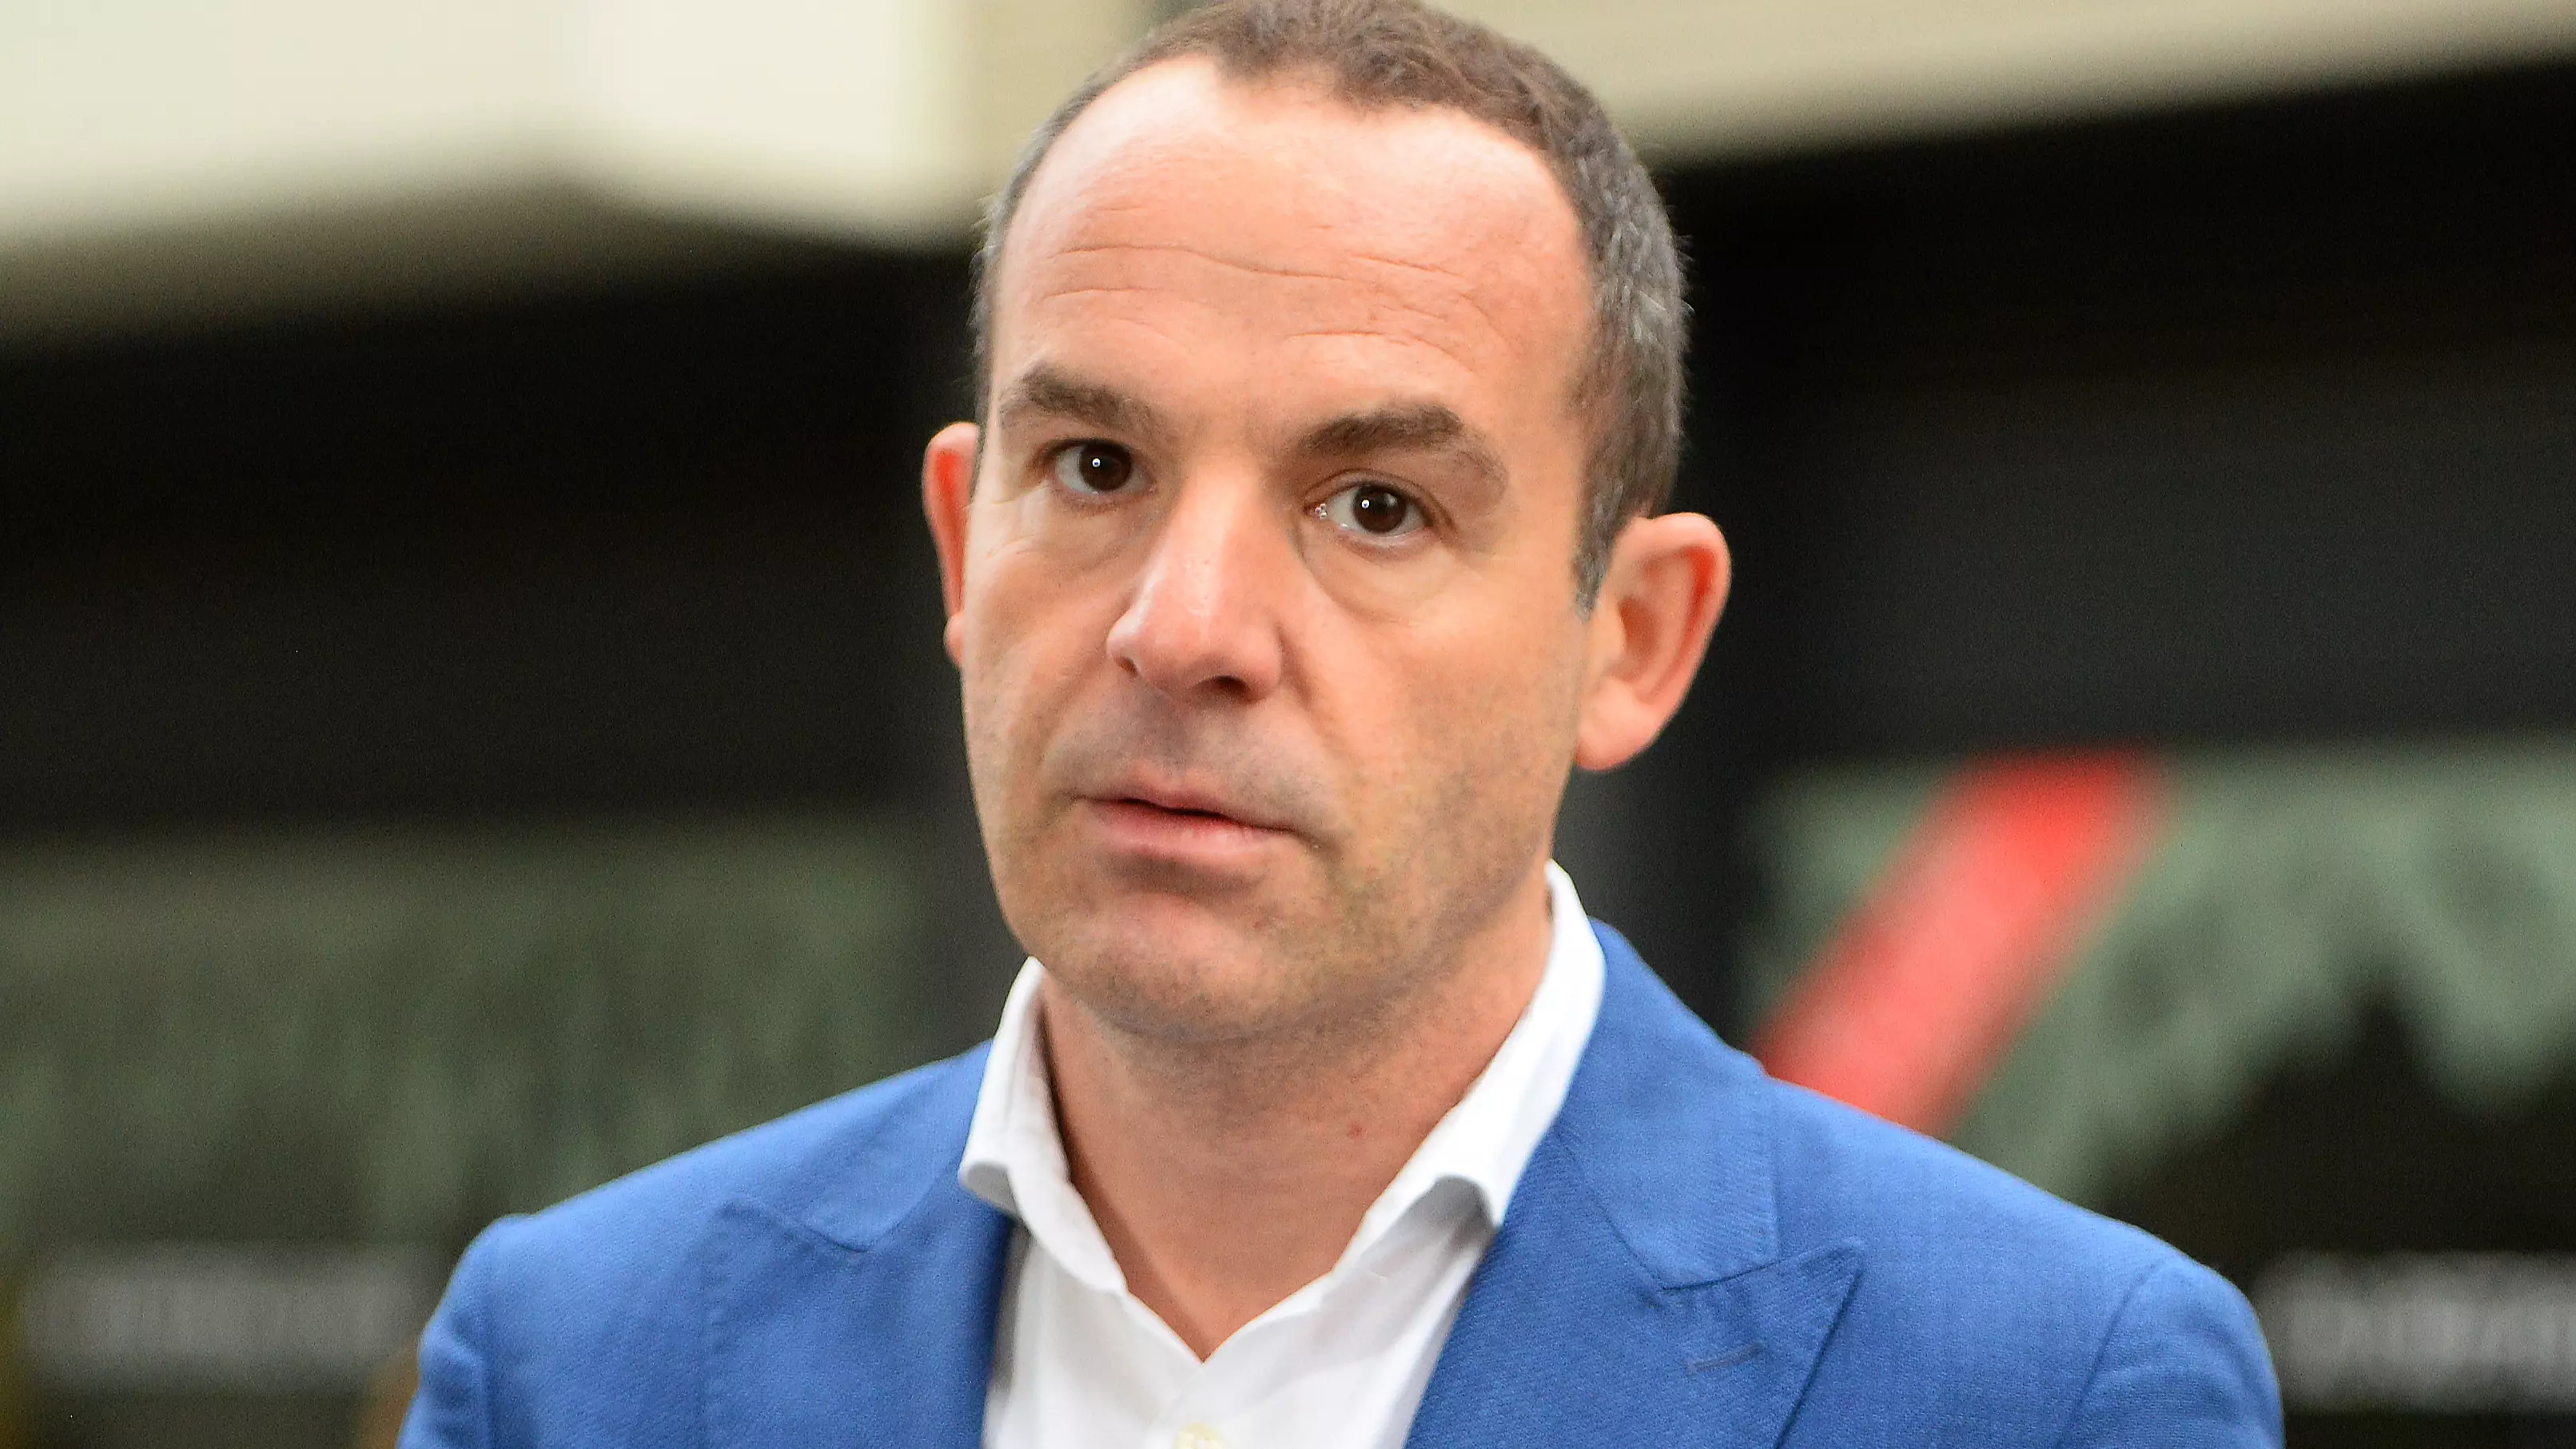 Martin Lewis Warns Millions Of Furloughed Workers To Check Pay Slips